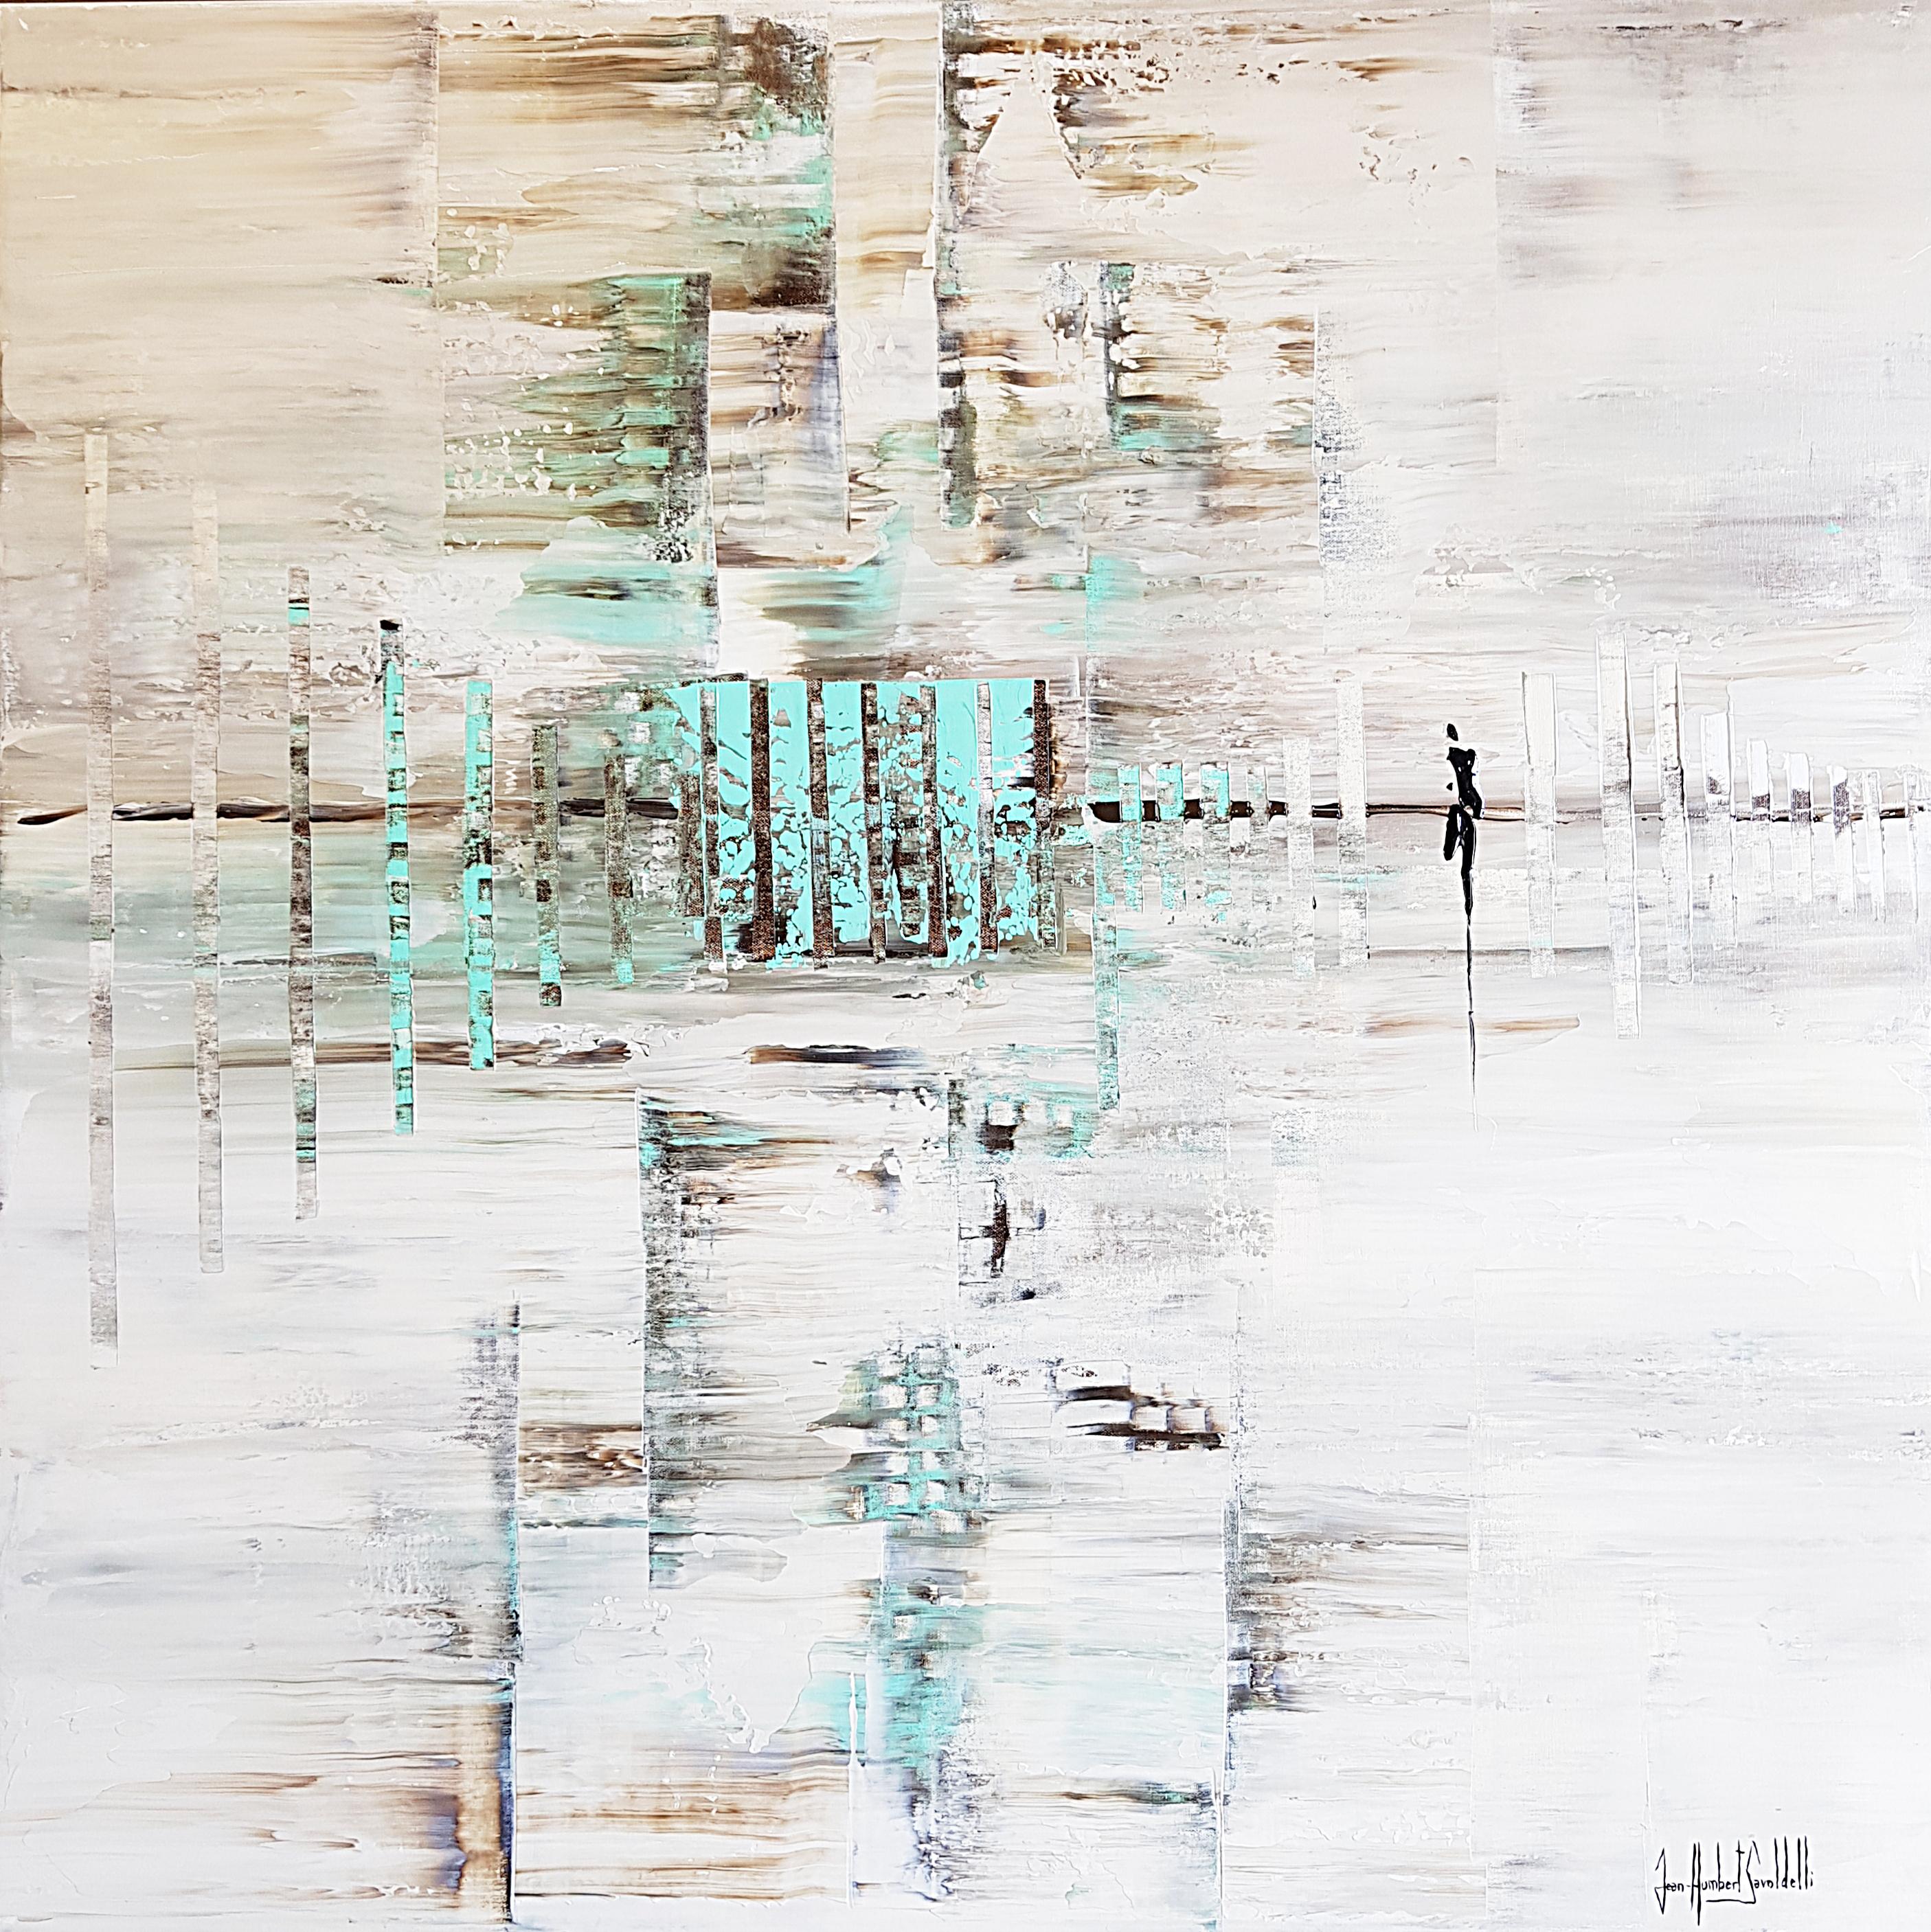 Jean-Humbert Savoldelli Landscape Painting - "Just an Illusion", Beige and Cyan Abstract Acrylic Sea Landscape